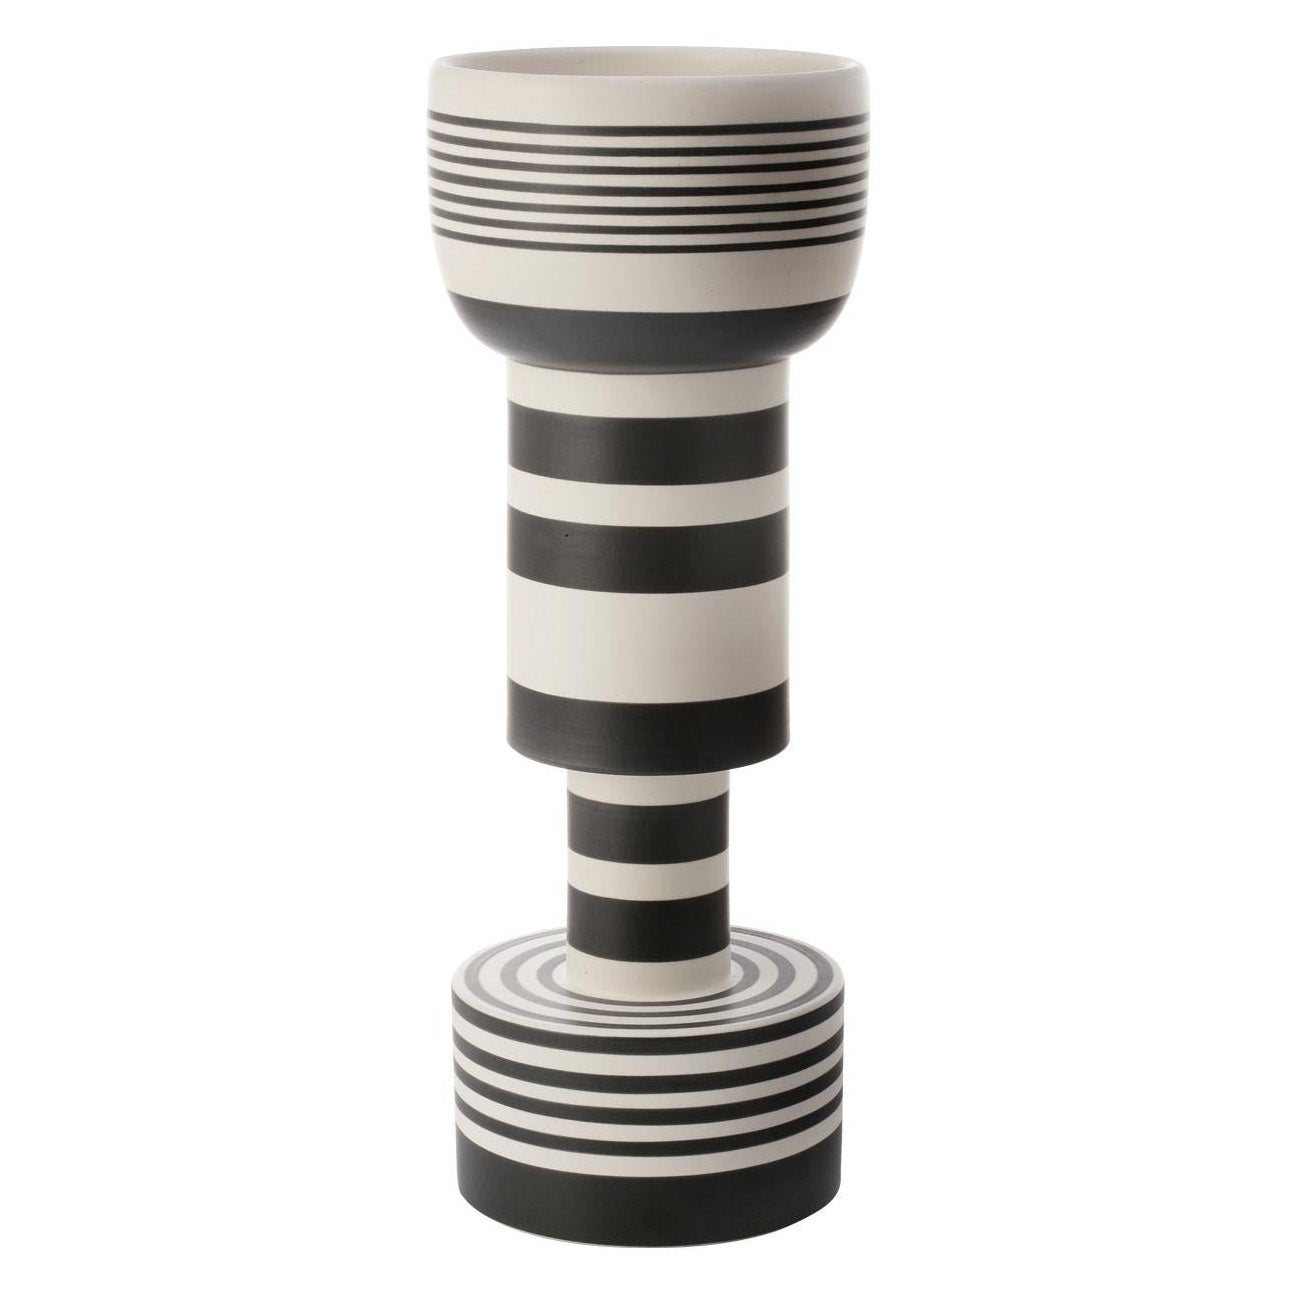 Chalice Vase by Ettore Sottsass